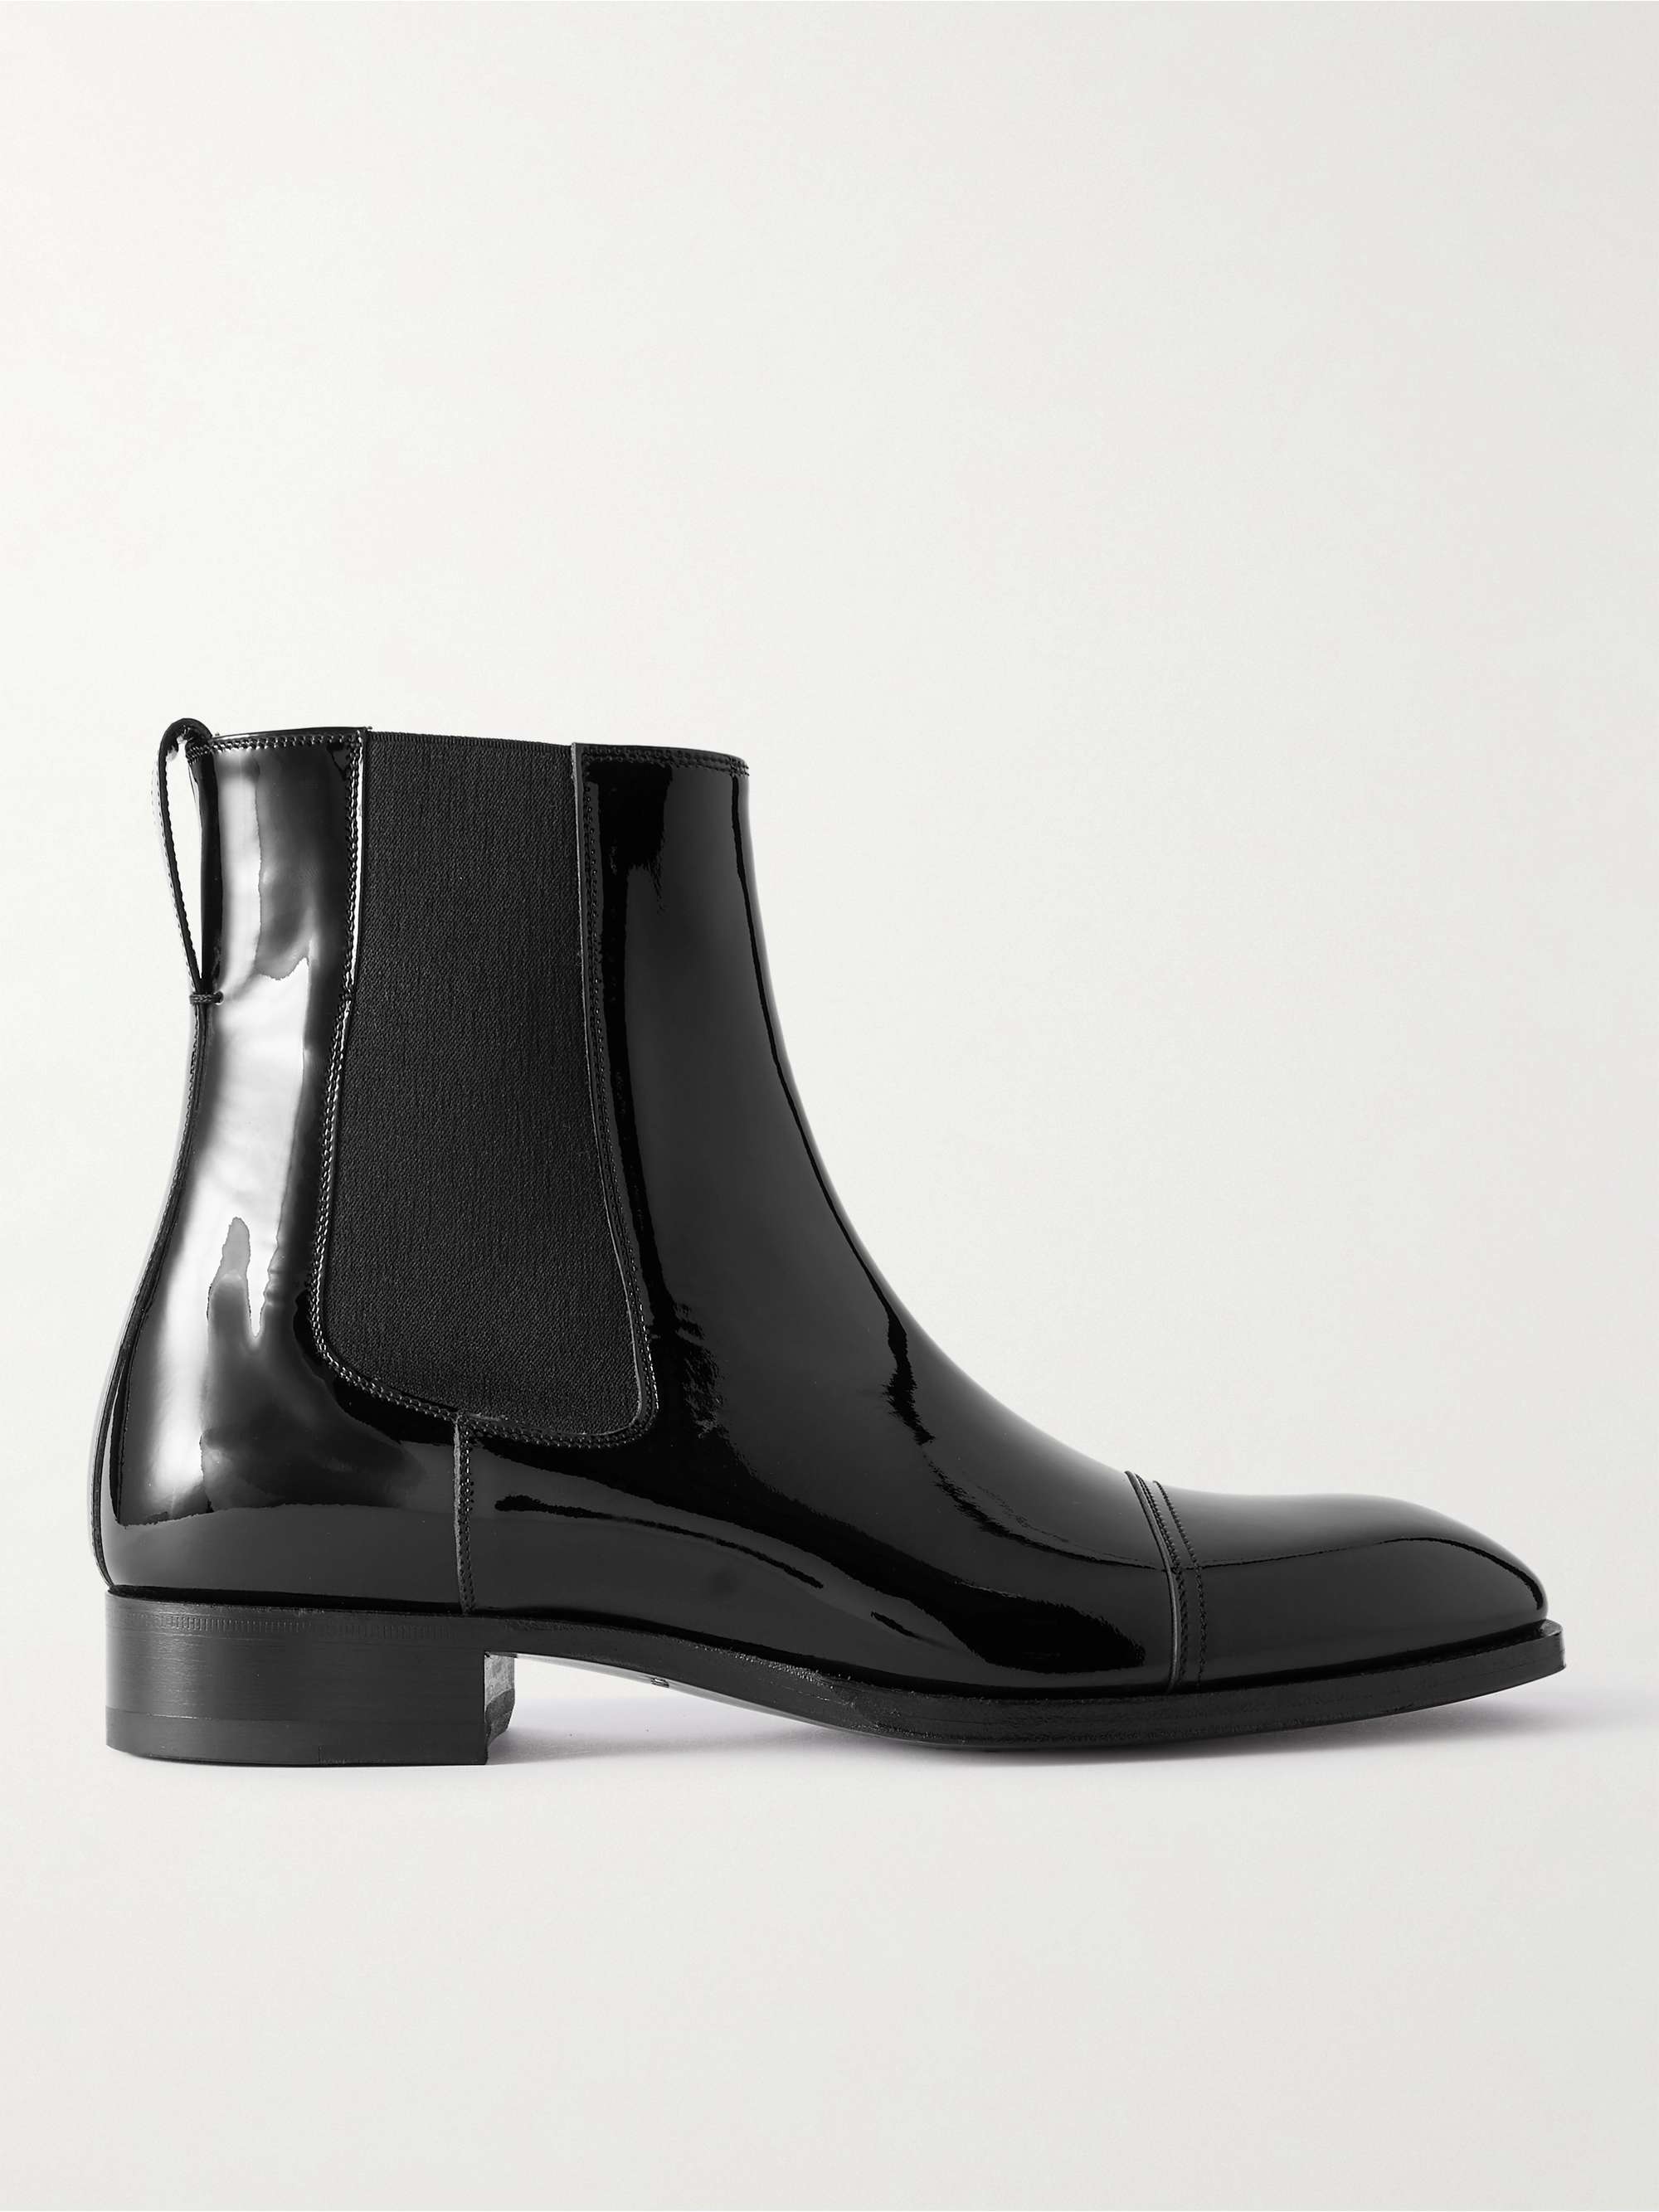 TOM FORD Patent-Leather Chelsea Boots for Men | MR PORTER